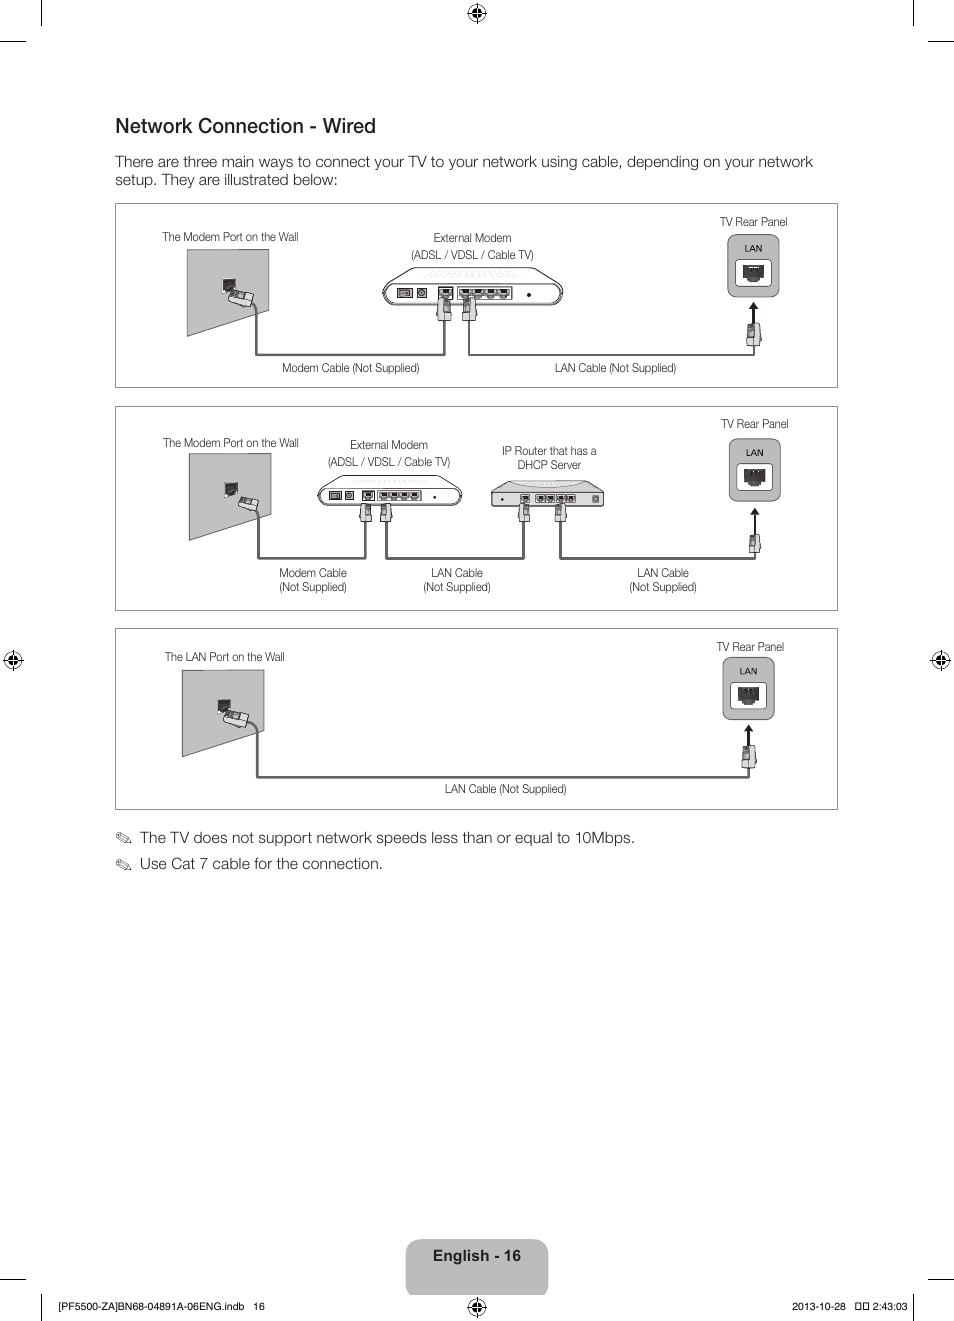 Network connection - wired | Samsung PN60F5500AFXZA User Manual | Page